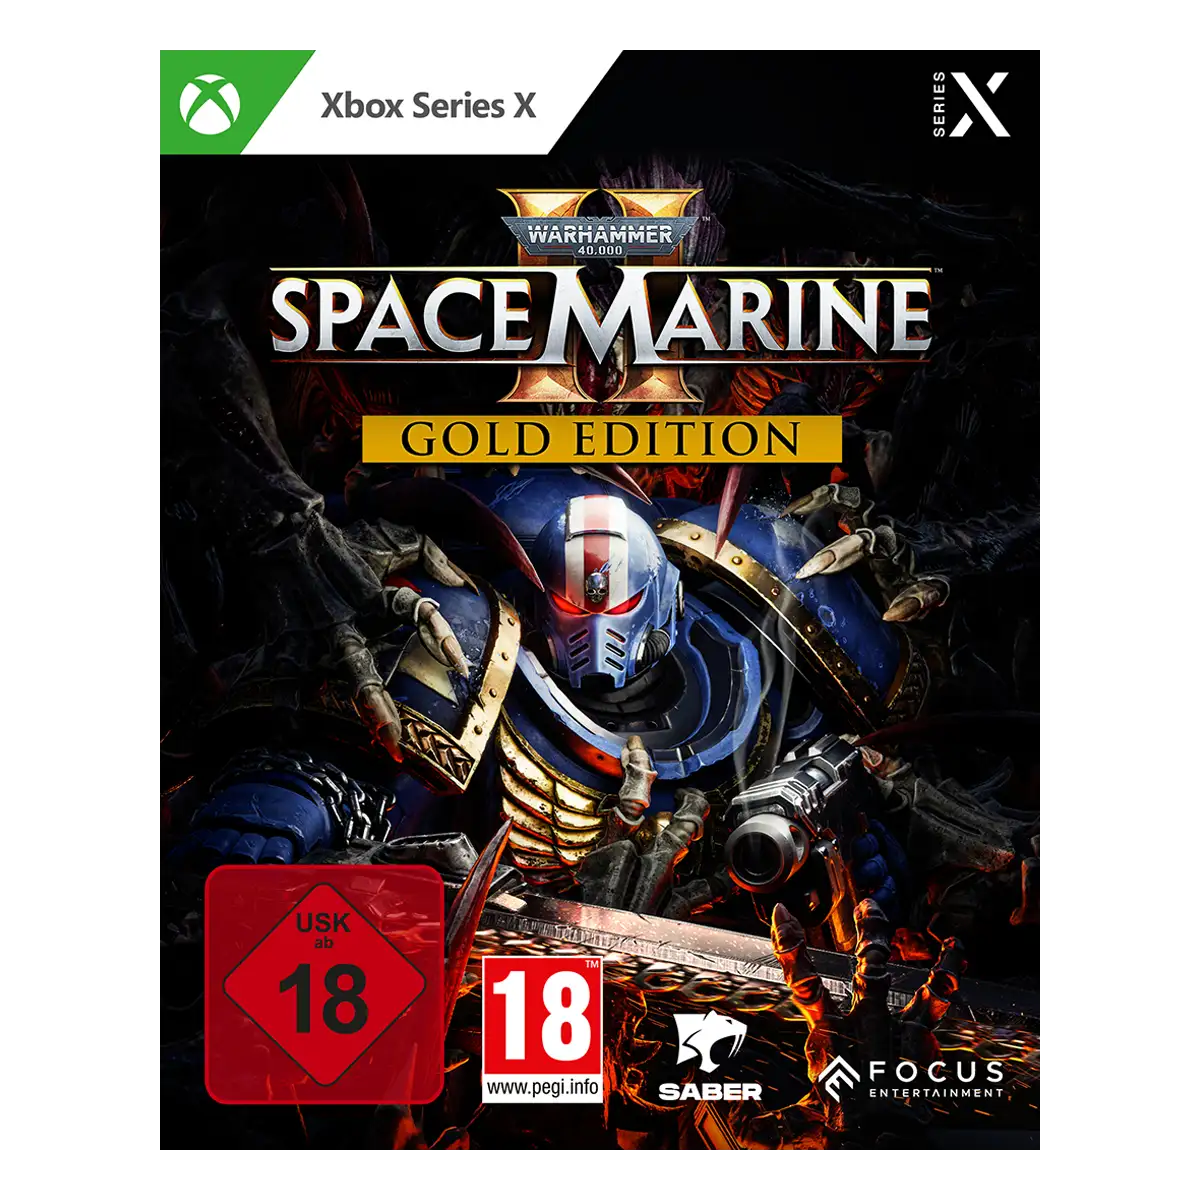 Warhammer 40,000: Space Marine 2 Gold Edition (XSRX) Image 2